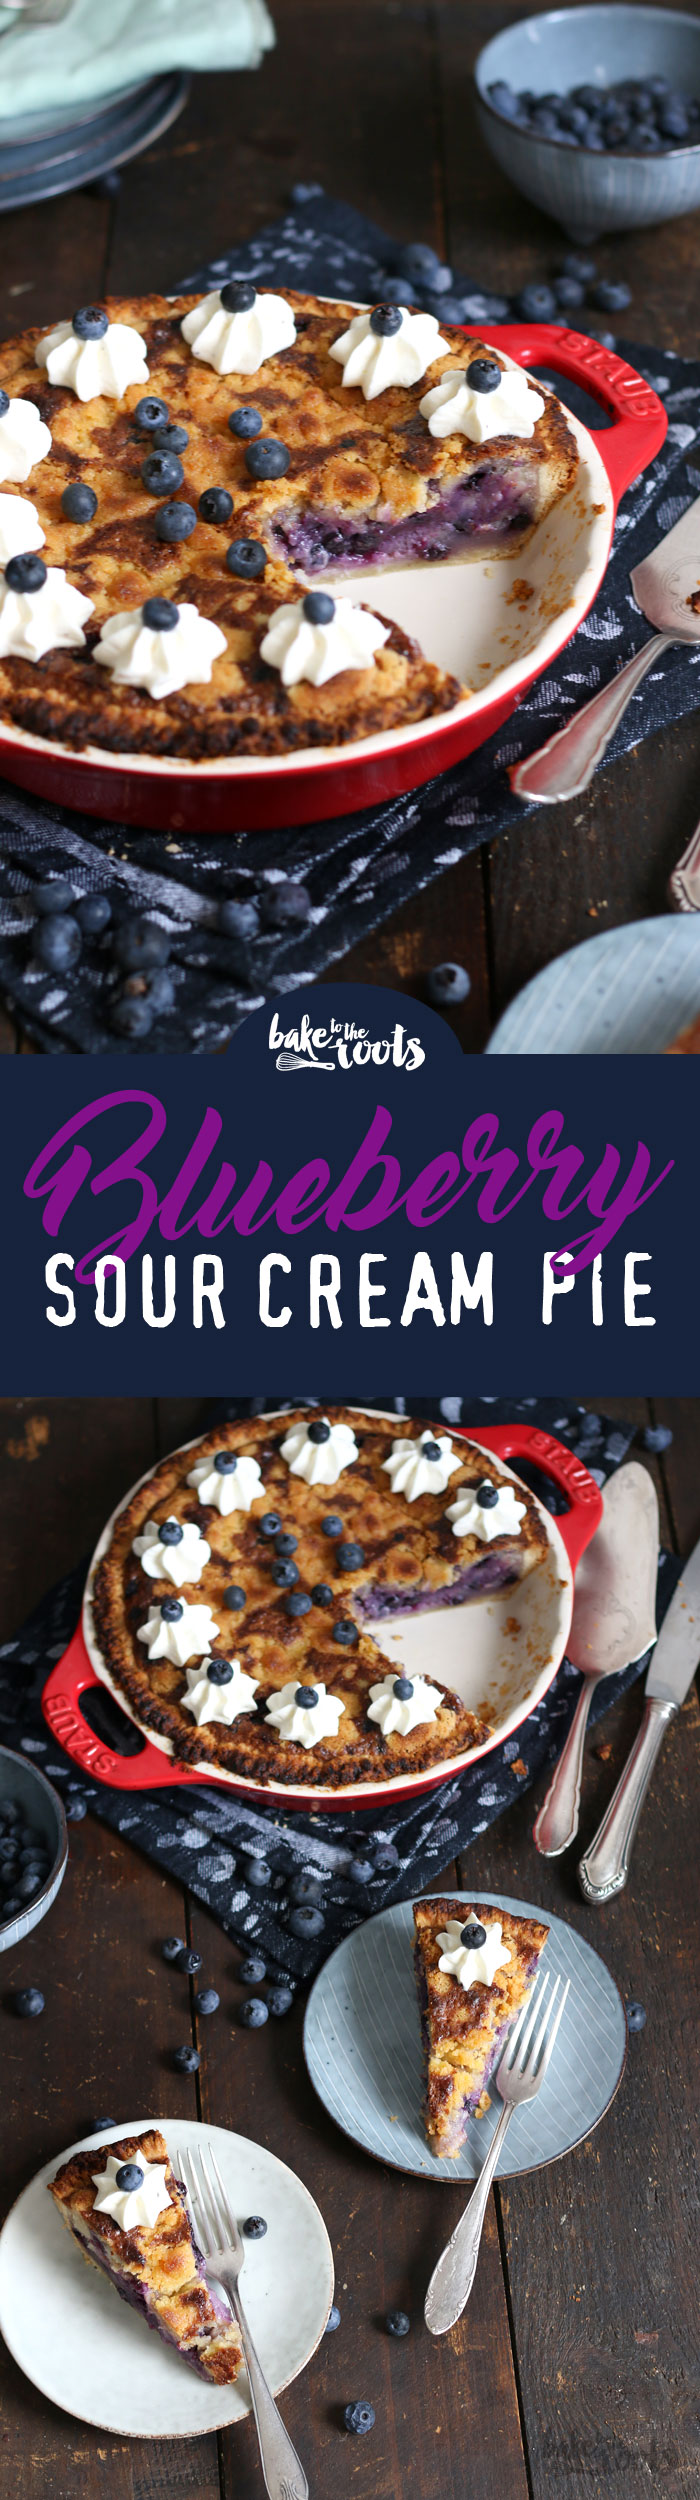 Delicious and refreshing Blueberry Pie with Sour Cream Filling | Bake to the roots